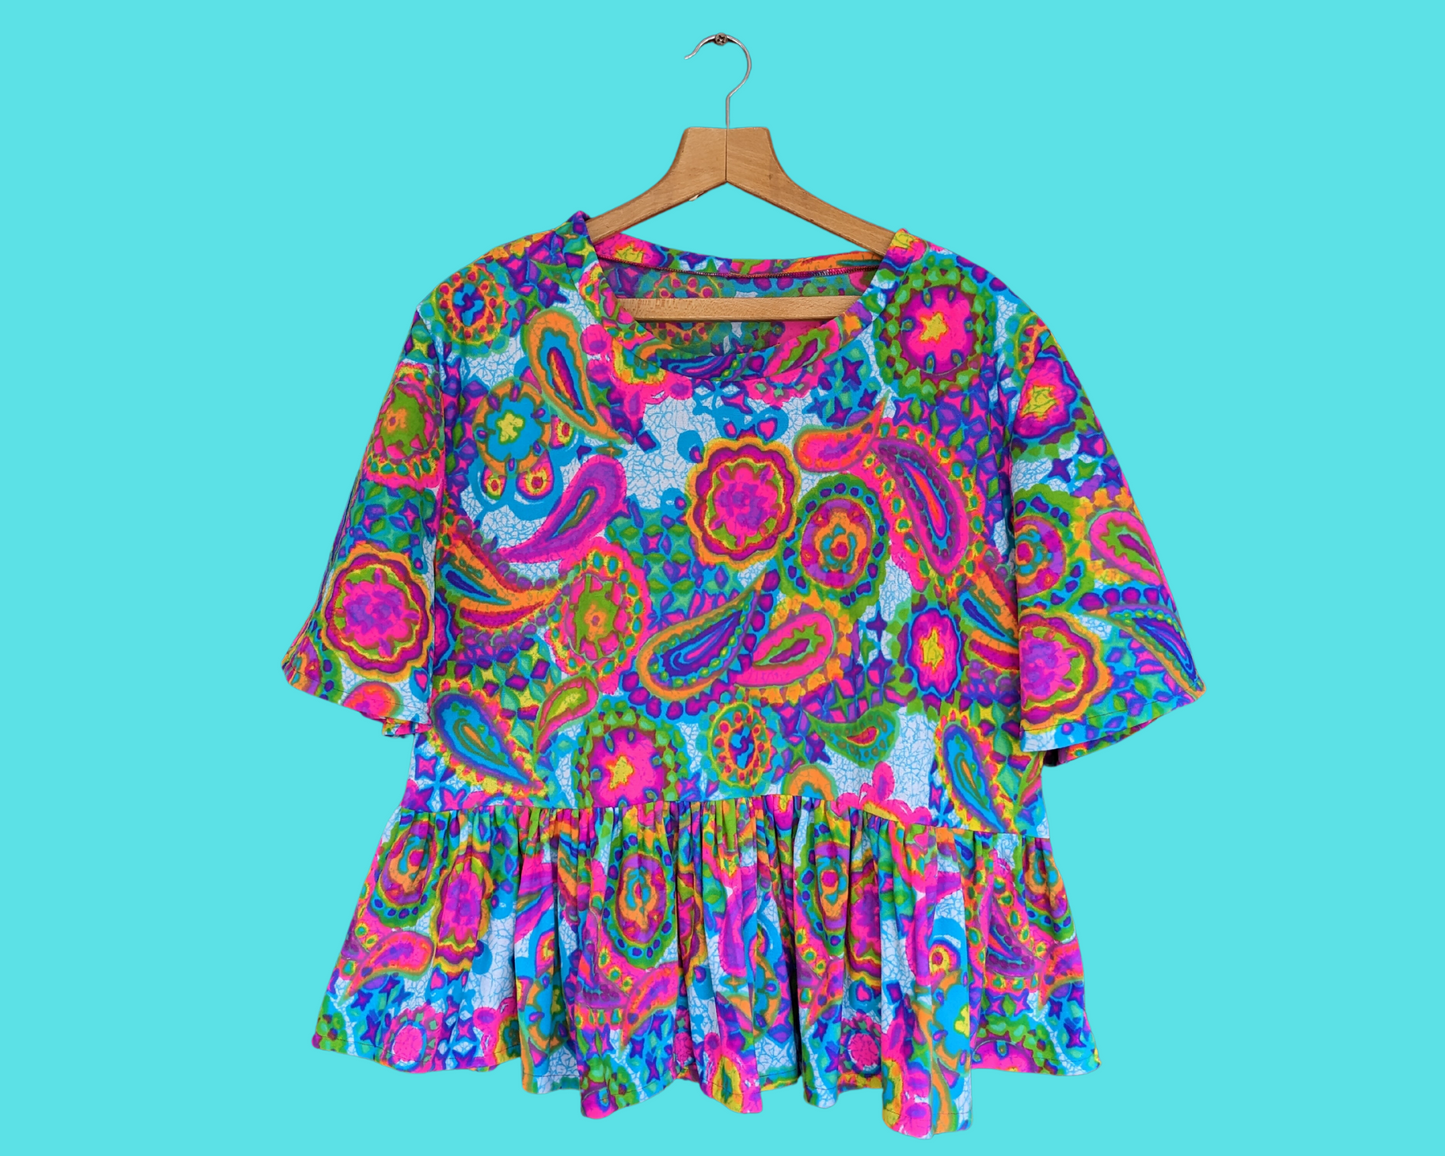 Handmade, Upcycled Vintage 1960's Inspired Rainbow, Psychedelic Polyester Blouse Size 2XL